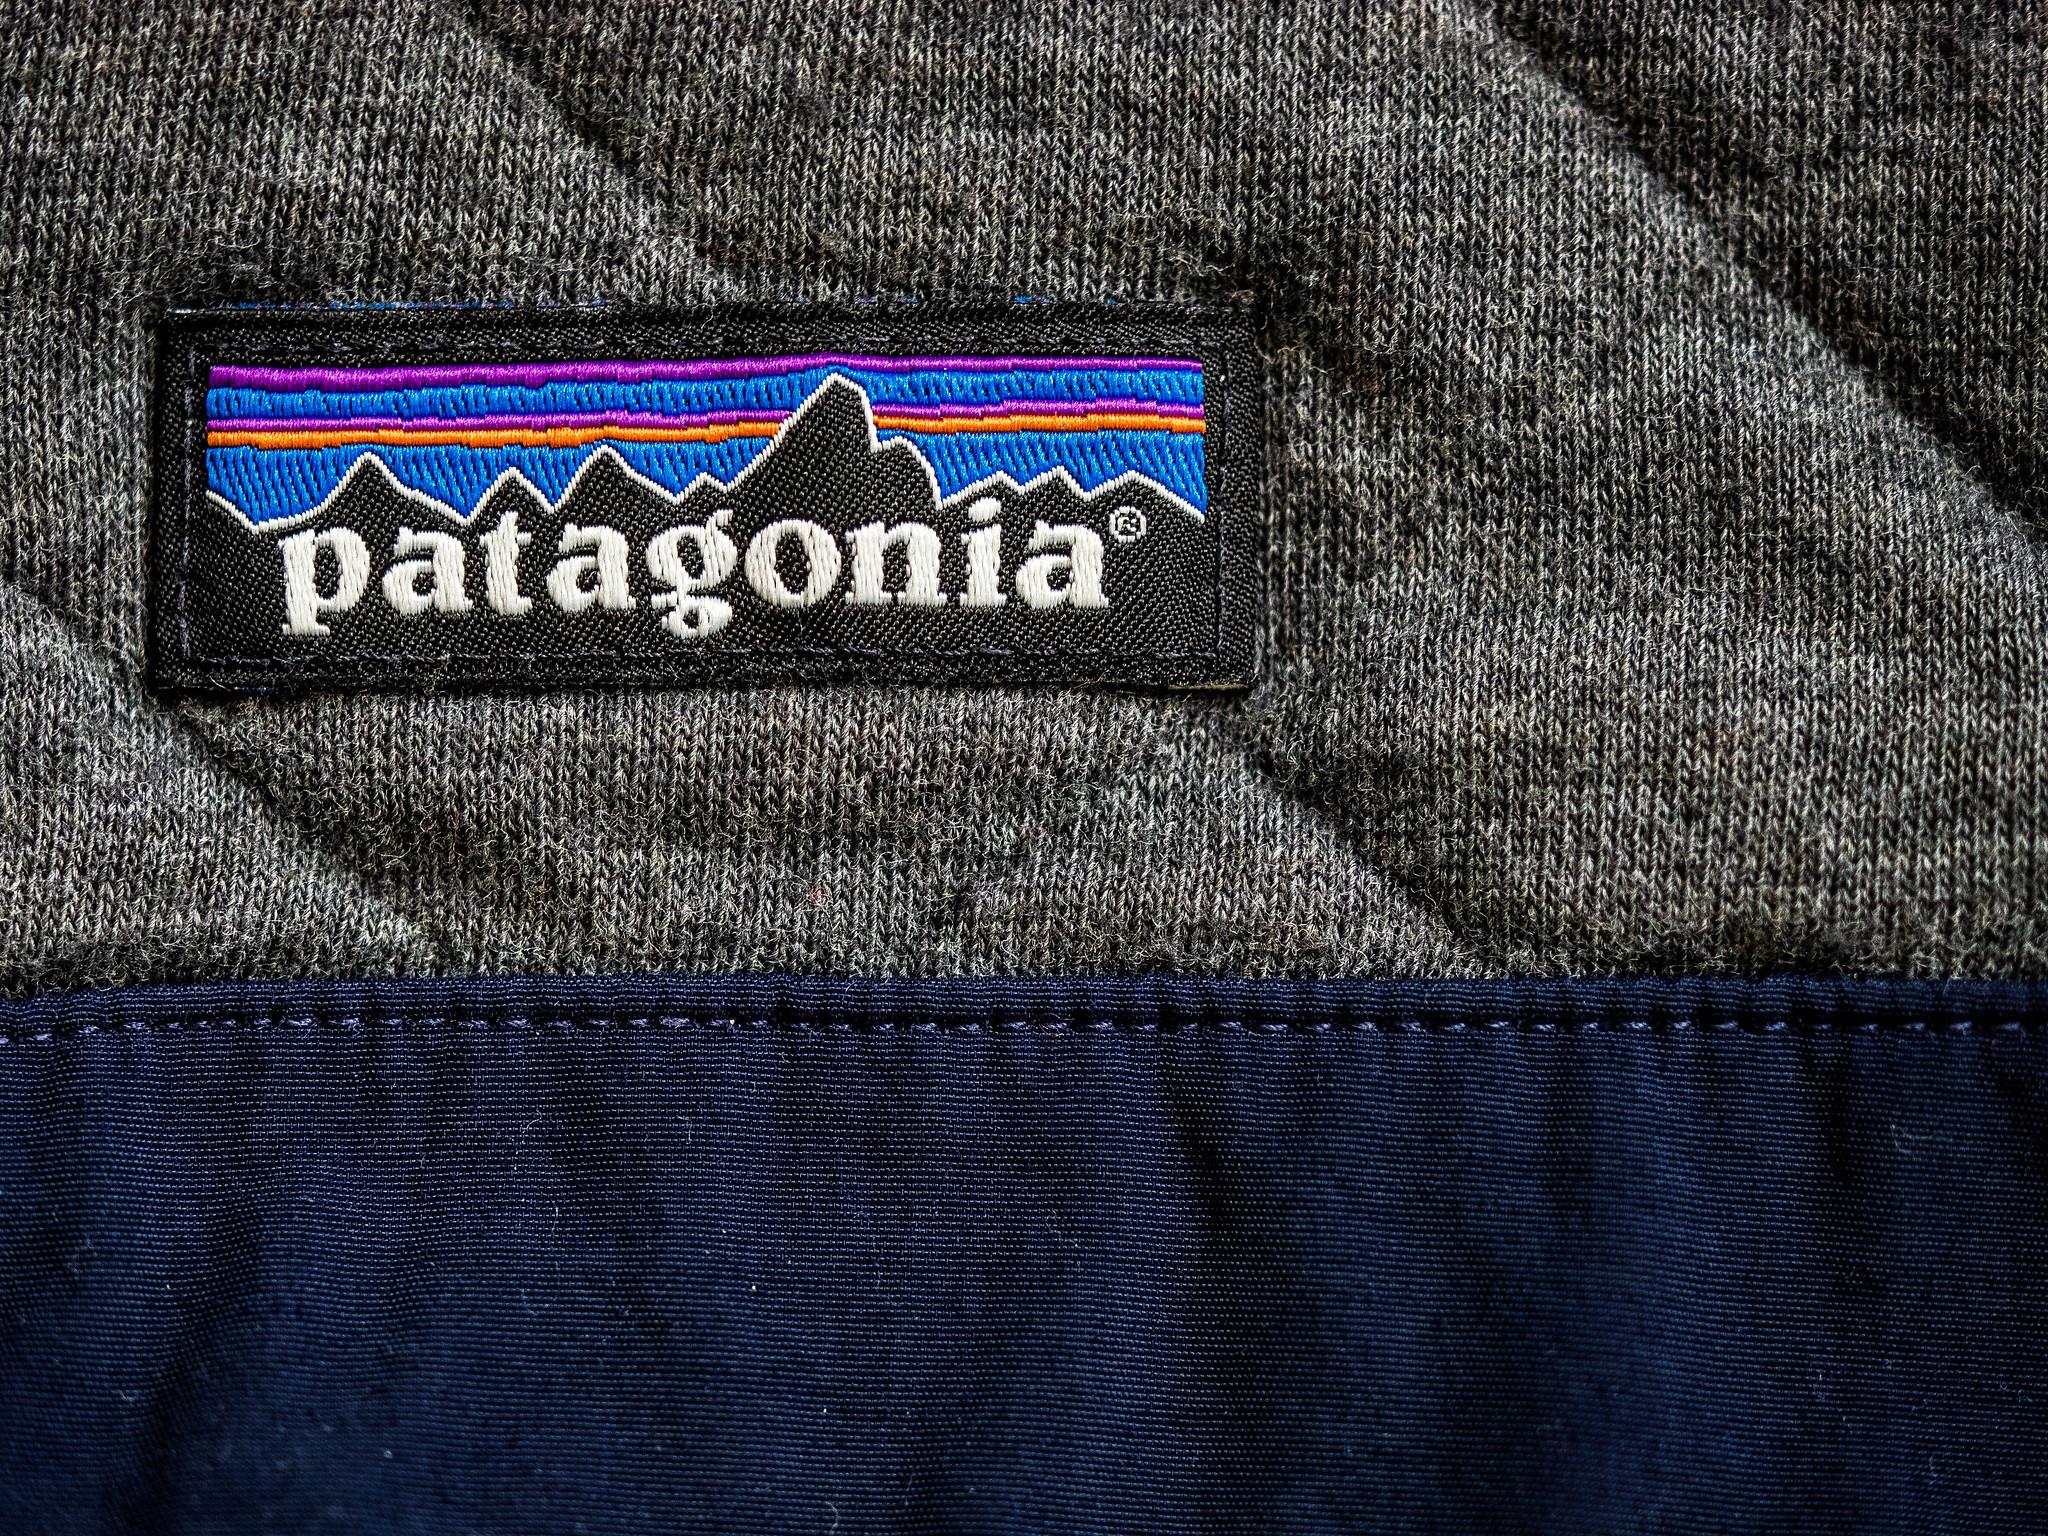 Patagonia supply chain